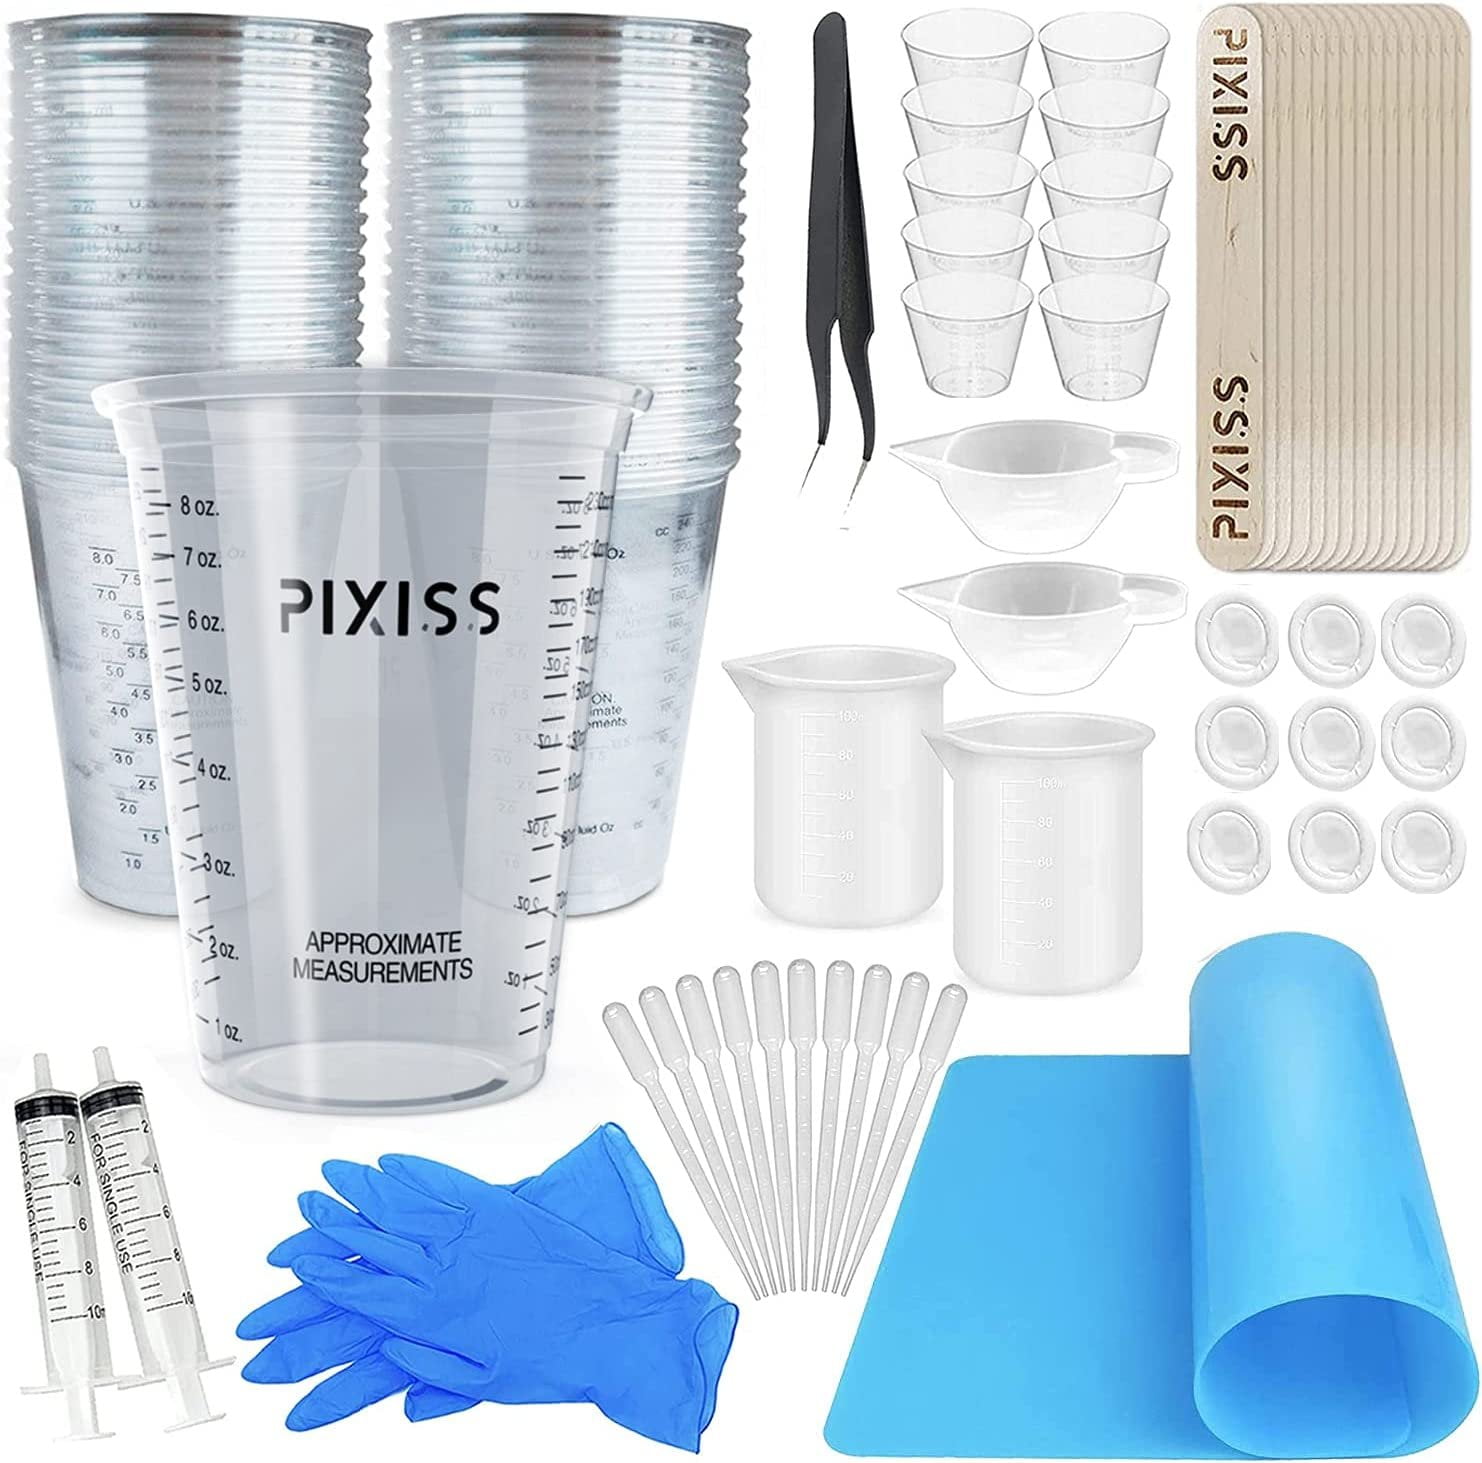 16 oz - 2 Cup 450 ml - Disposable Measuring Cups - Plastic Graduated Mixing Cups - for Mixing Resin/Epoxy, Paint, Cooking, Baking and Crafts (12